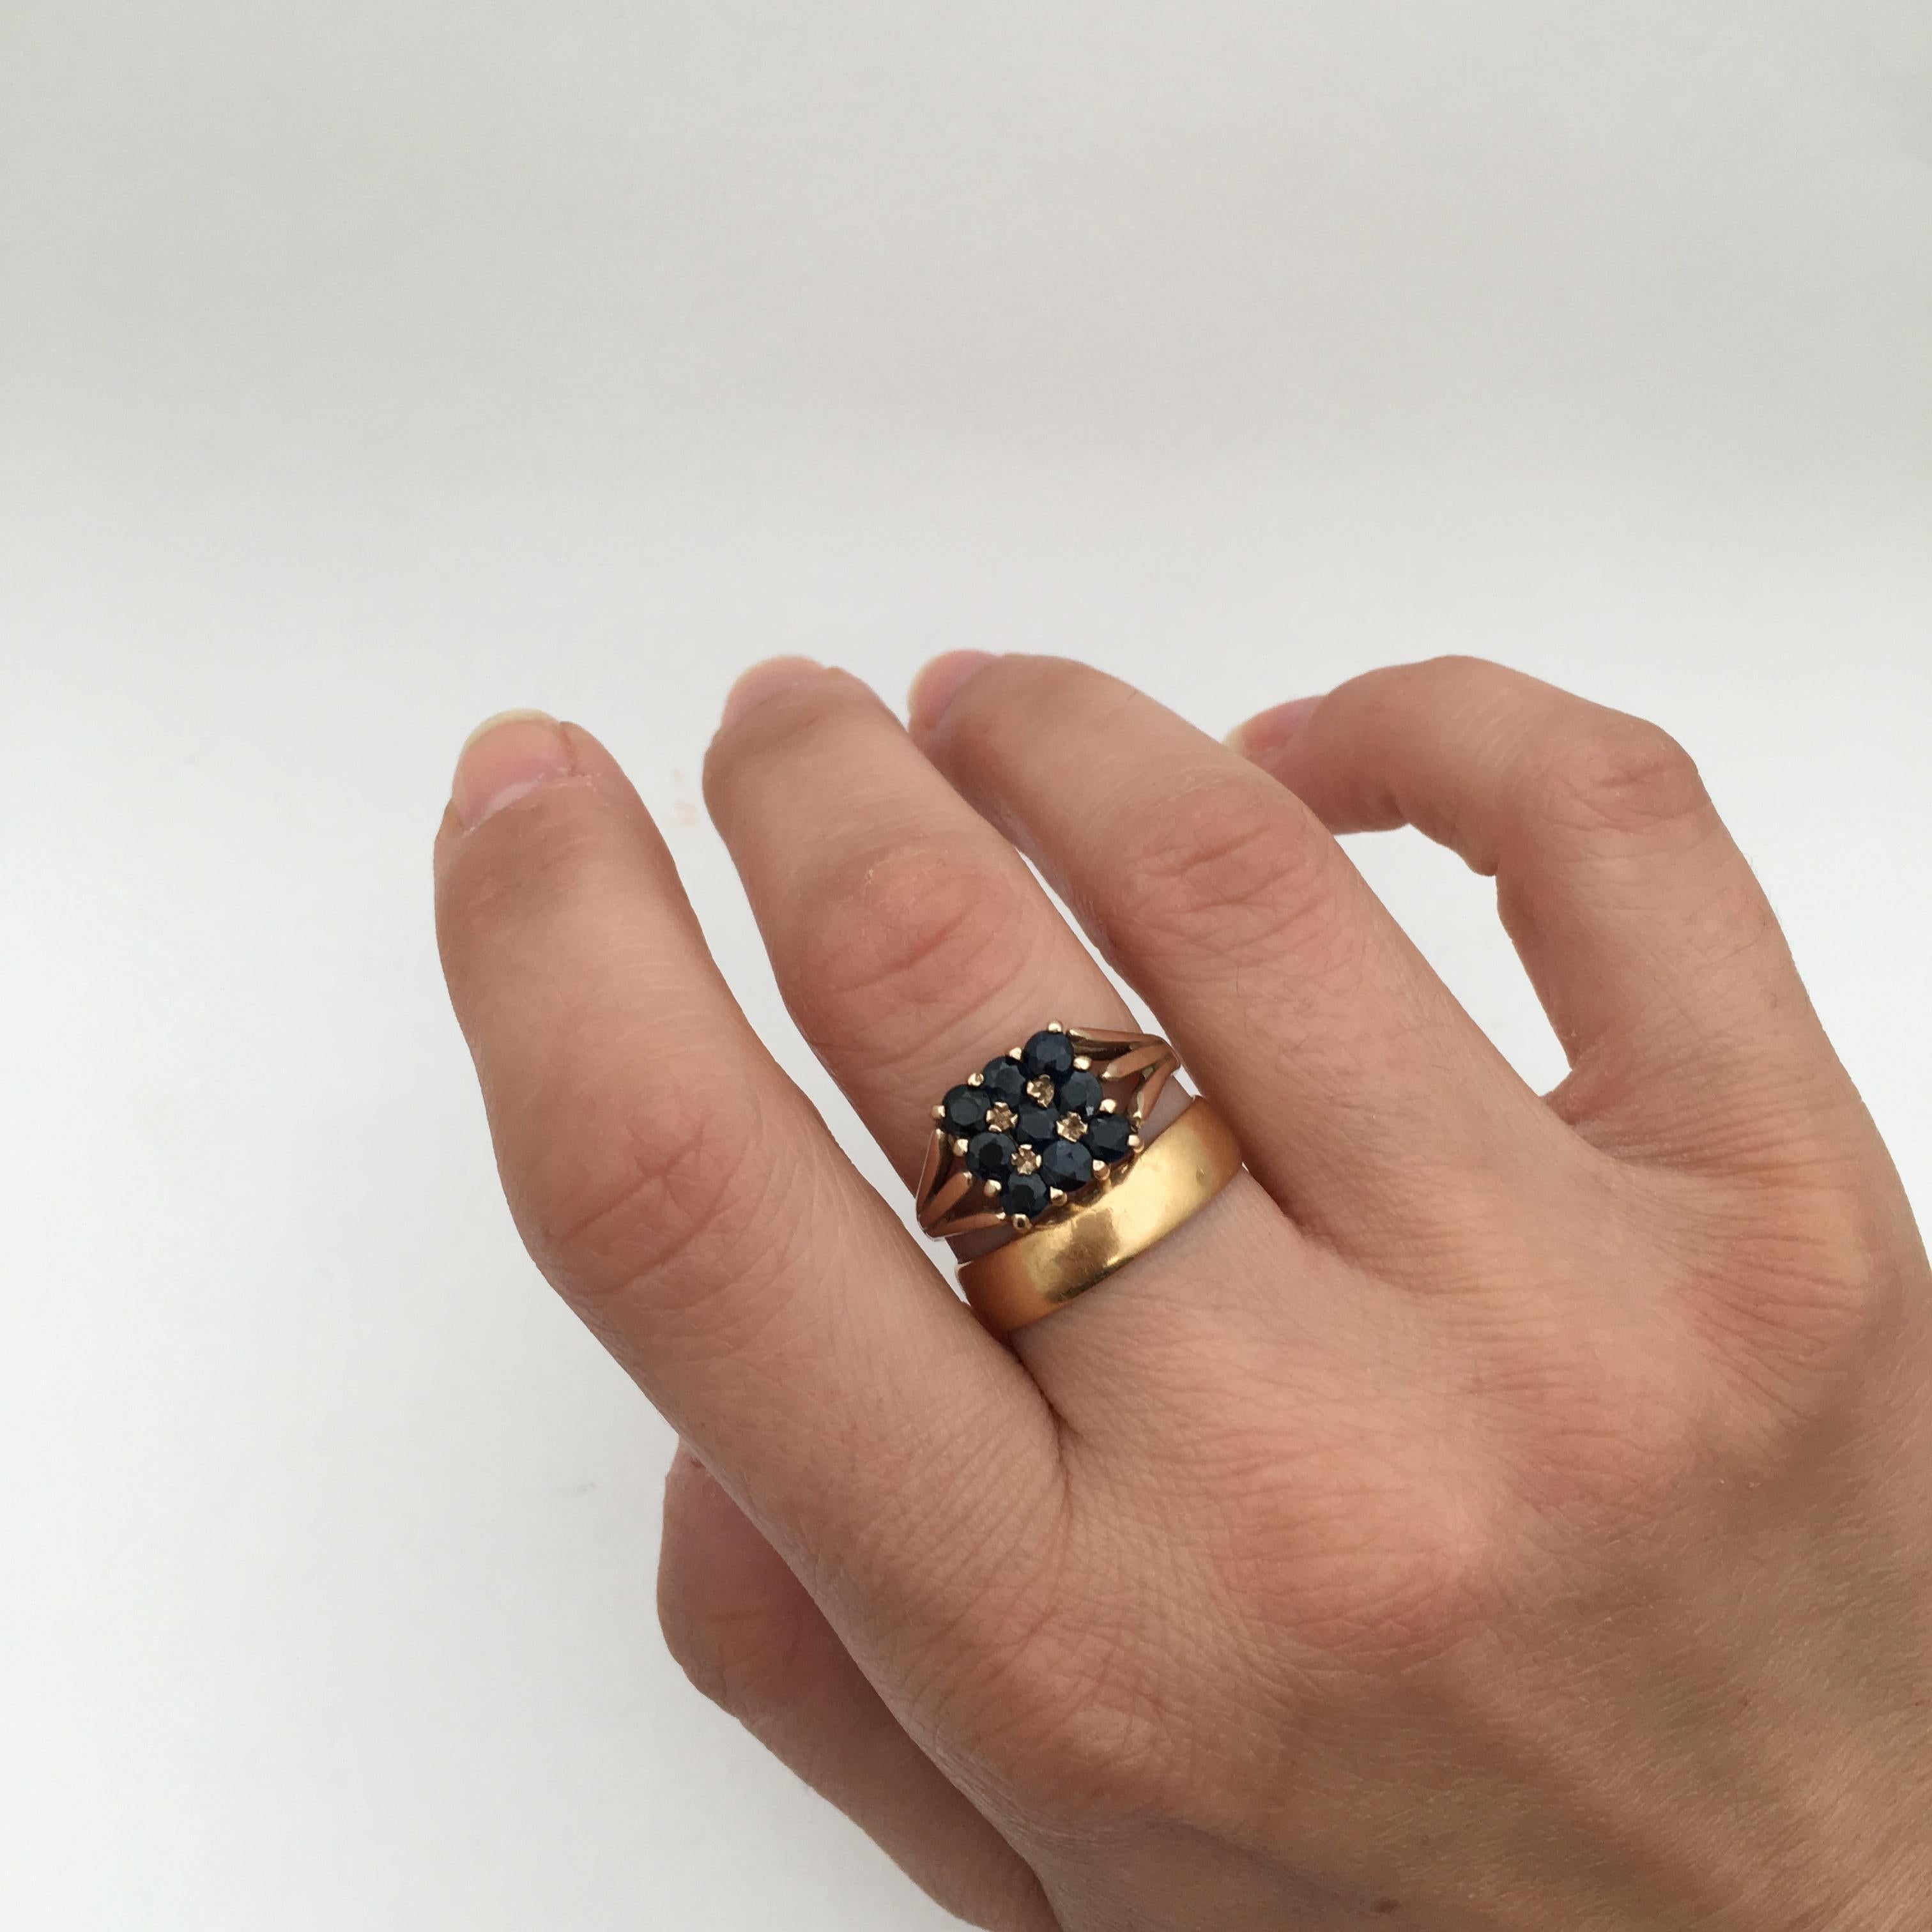 Gold Vintage Jewelry Sapphire Gemstone Square Cluster Ring 1970s Dark Blue For Sale 5